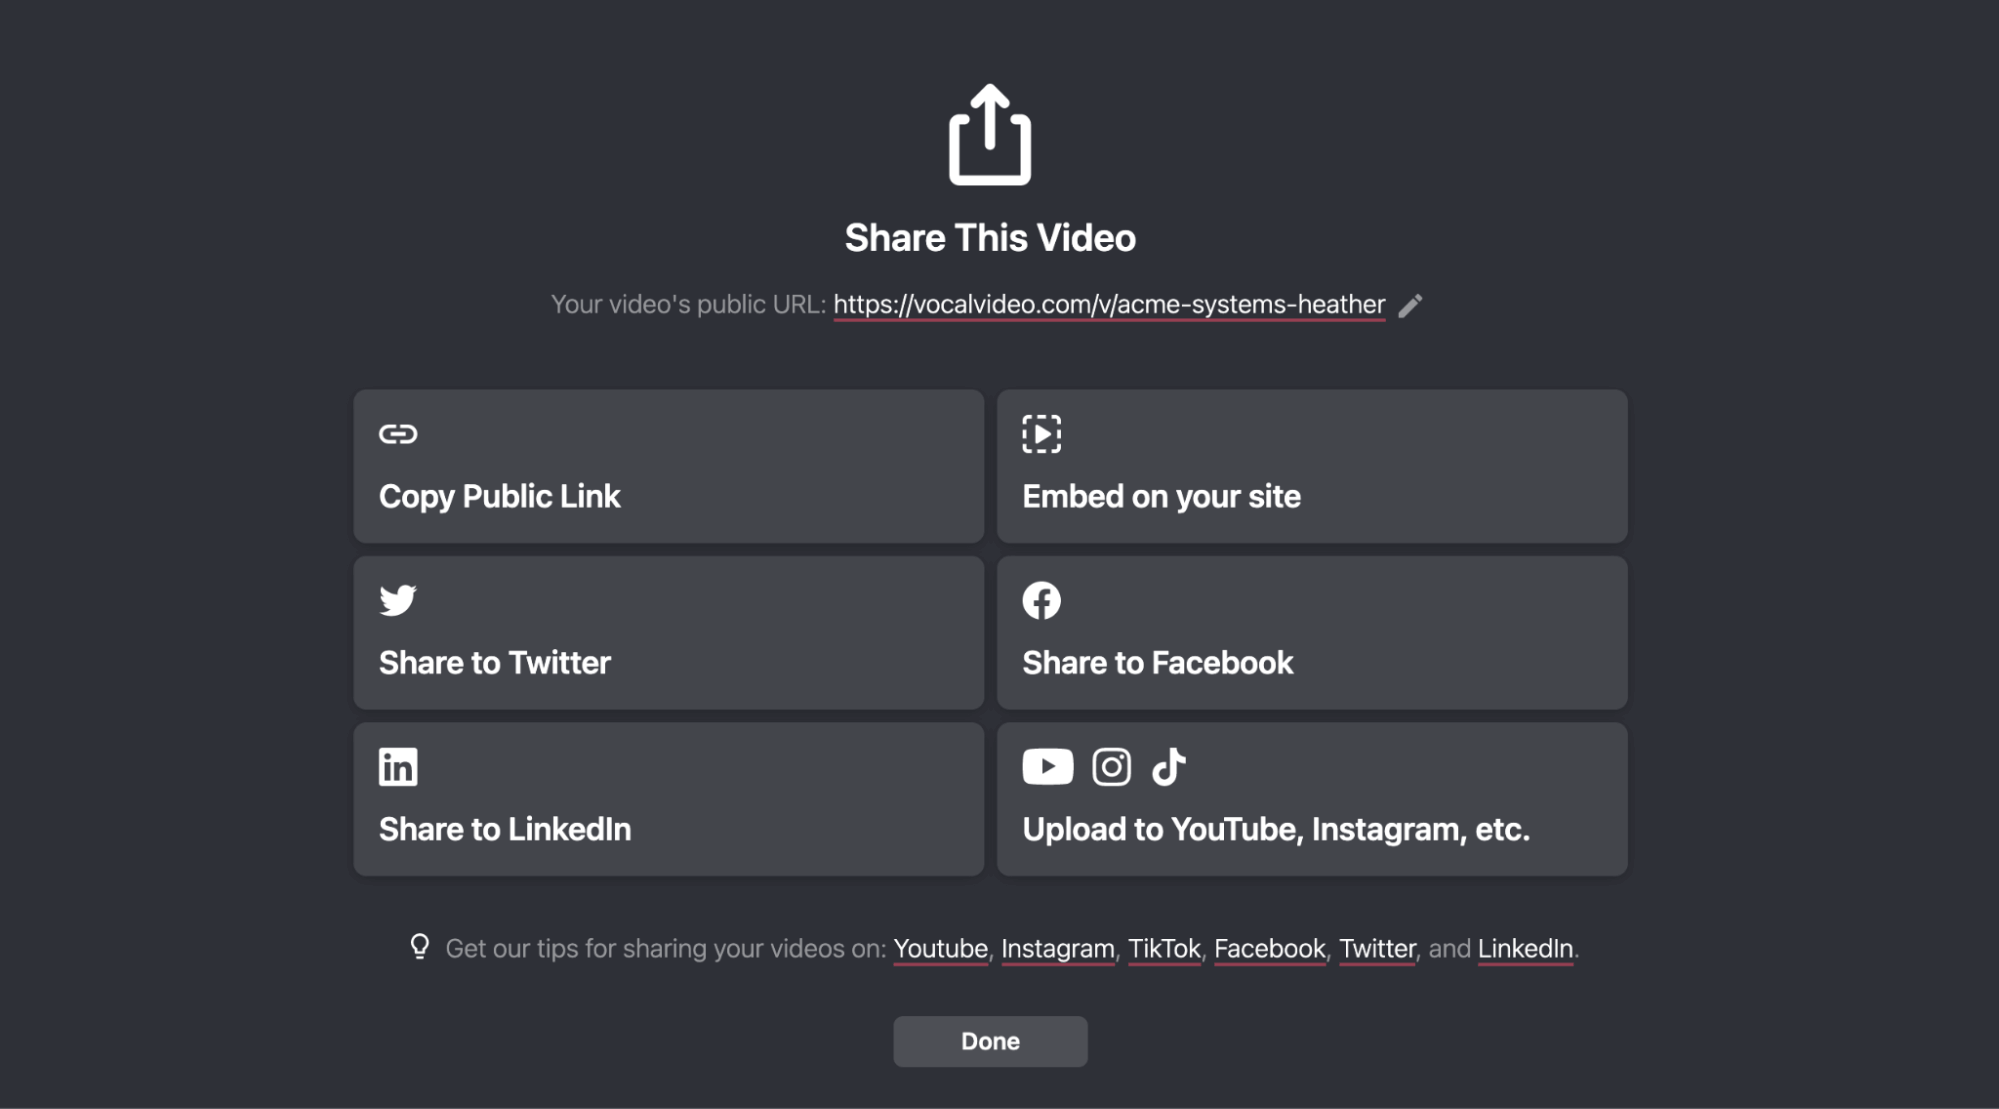 Share This Video: Copy Public Link, Embed on your site, Share to Twitter, Share to Facebook, Share to LinkedIn, Upload to YouTube, Instagram, etc.